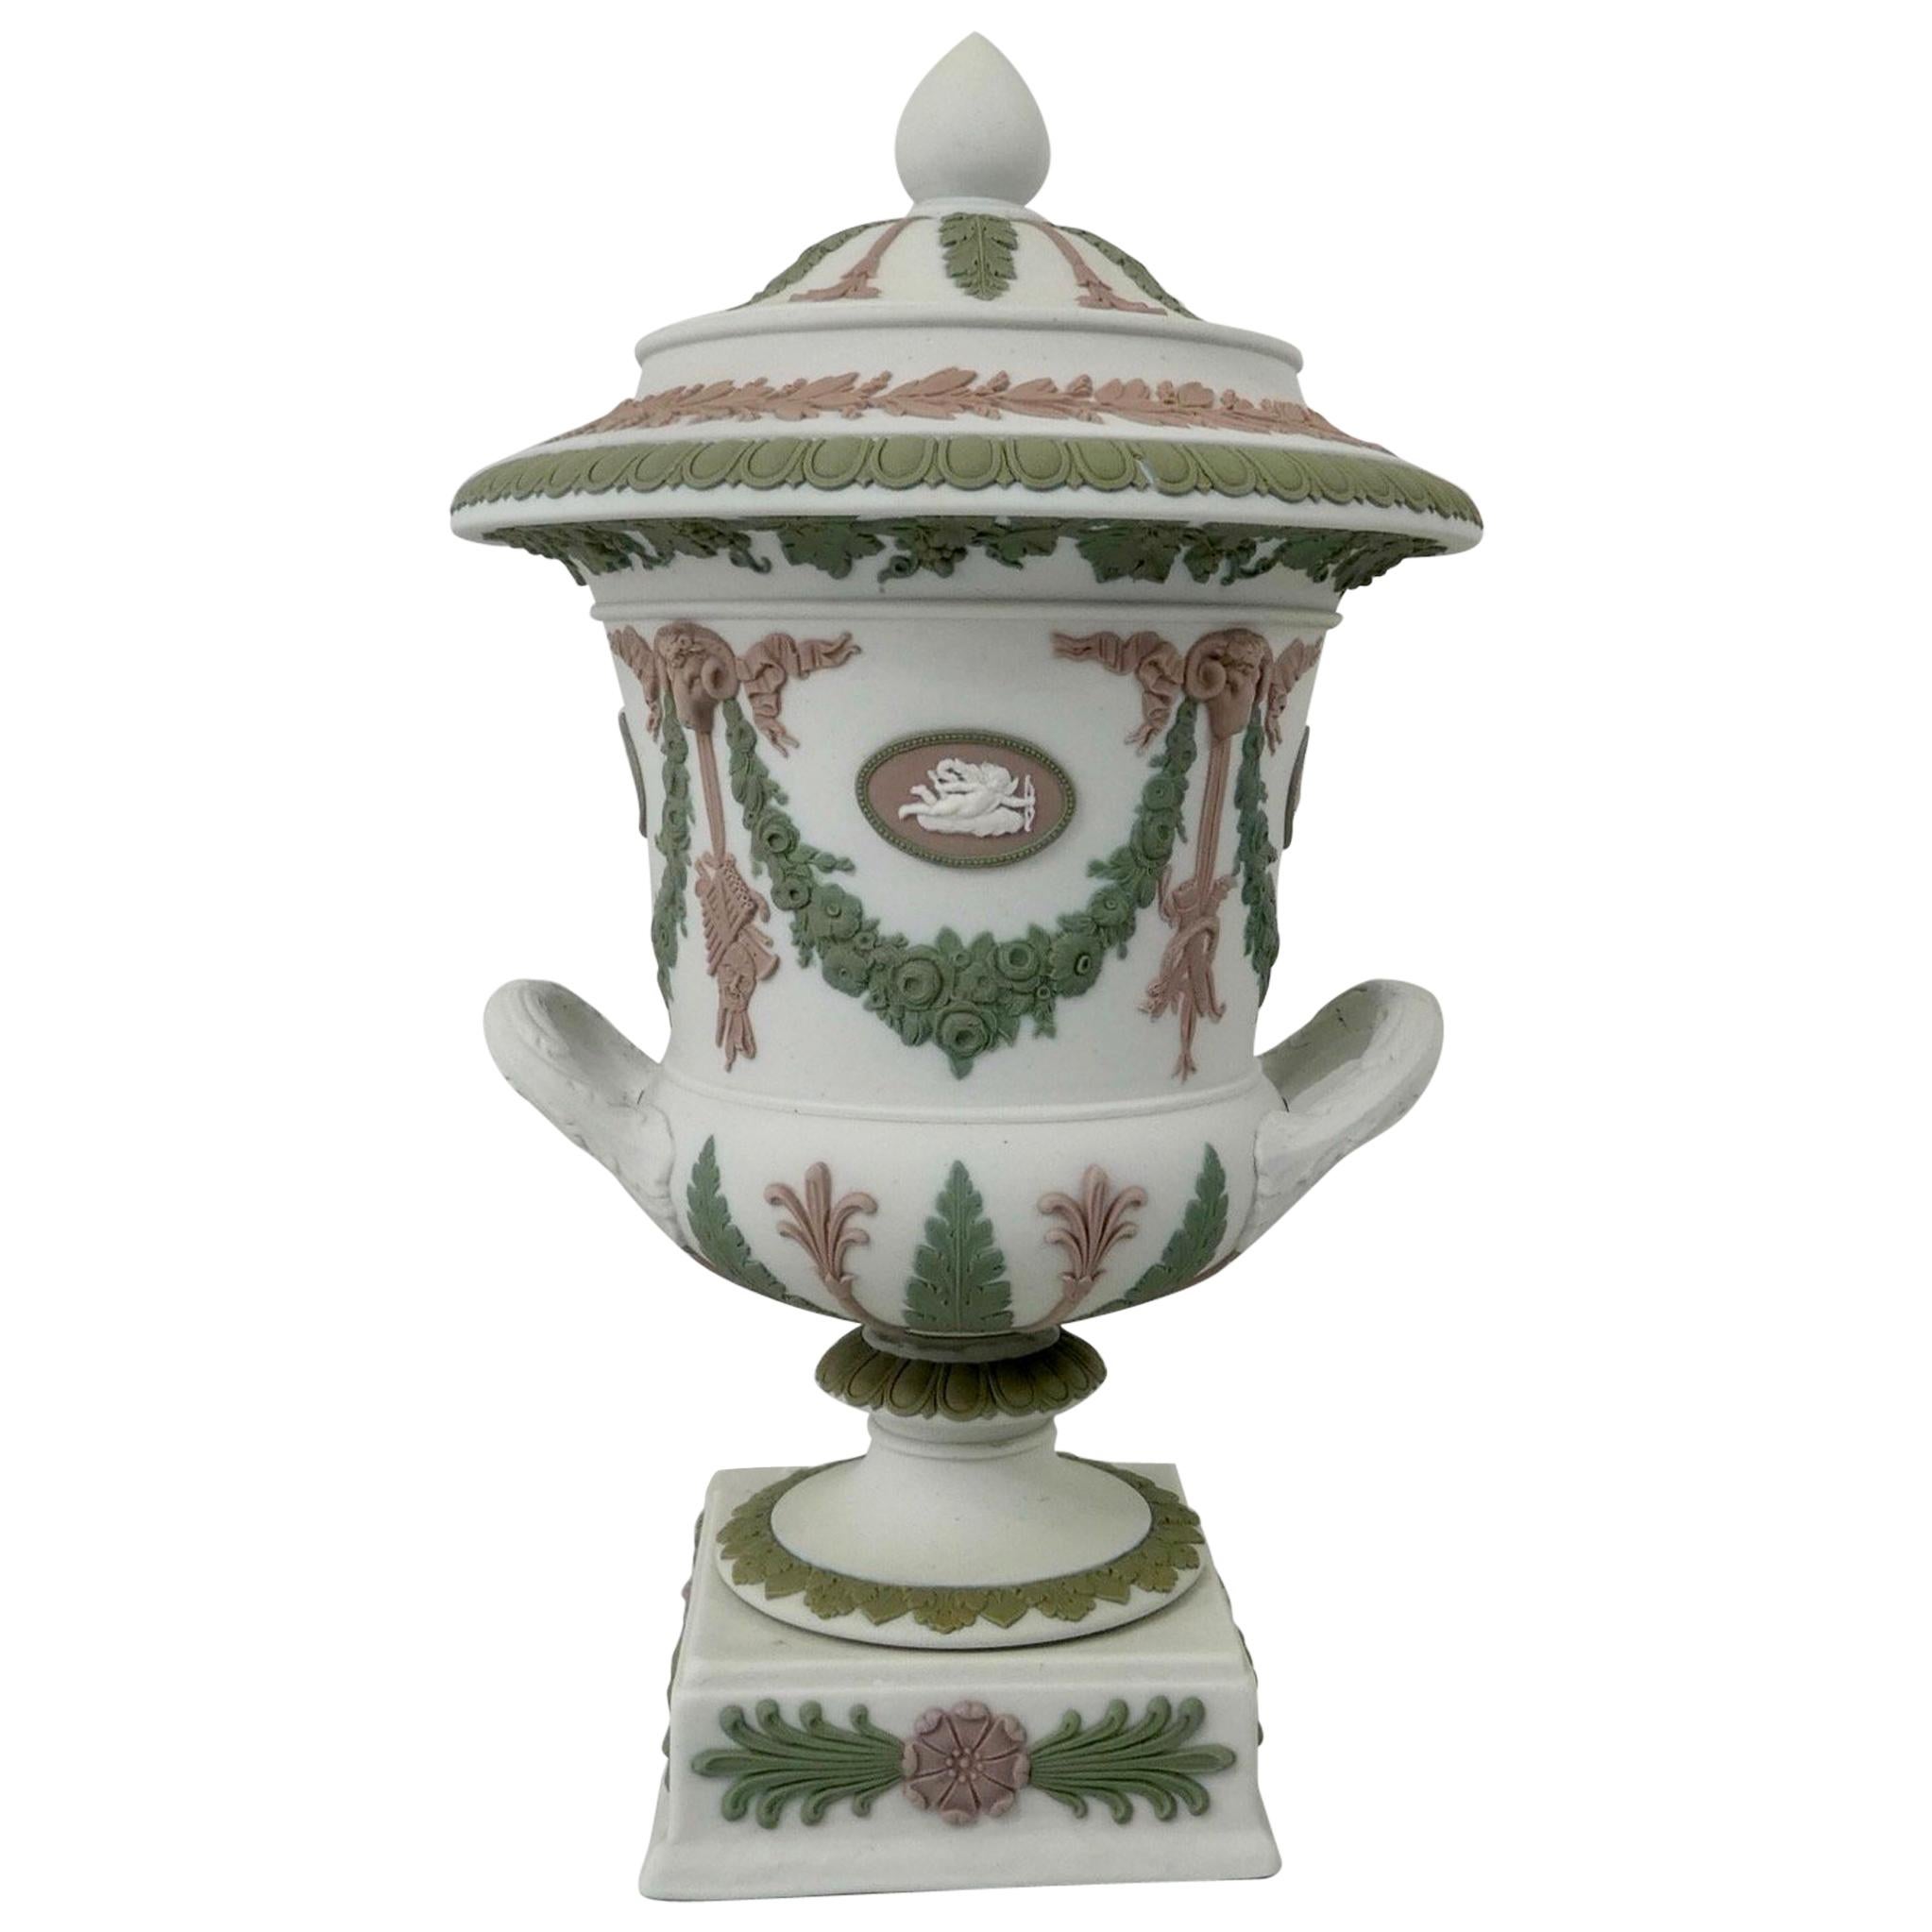 Wedgwood ‘Three colour’ Vase and Cover, circa 1900